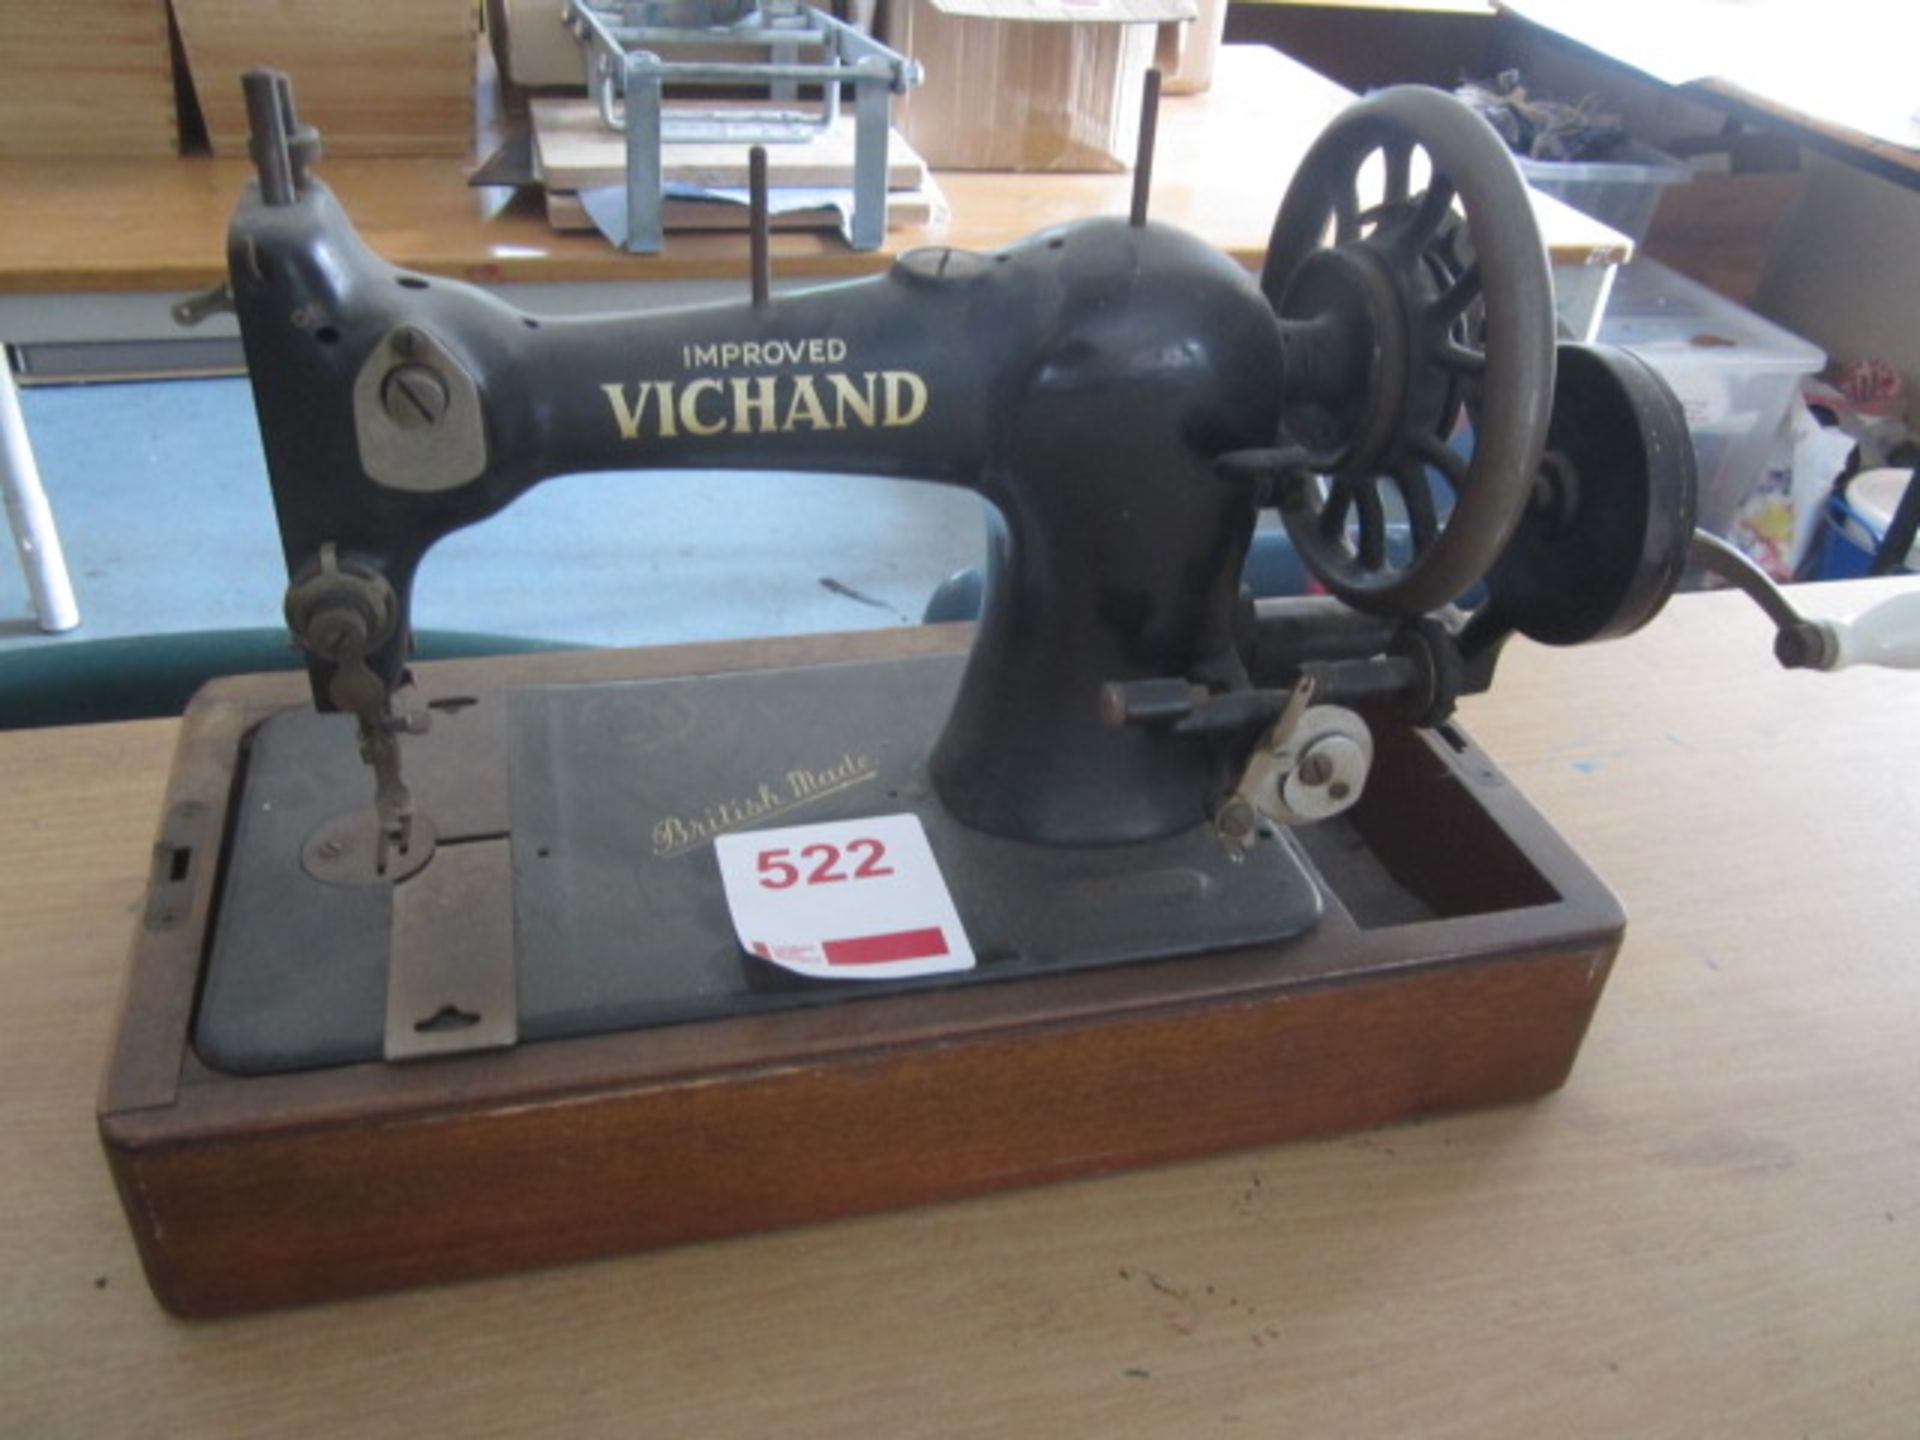 Vichand Improved hand operated sewing machine. Located at Church FarmPlease note: This lot, for